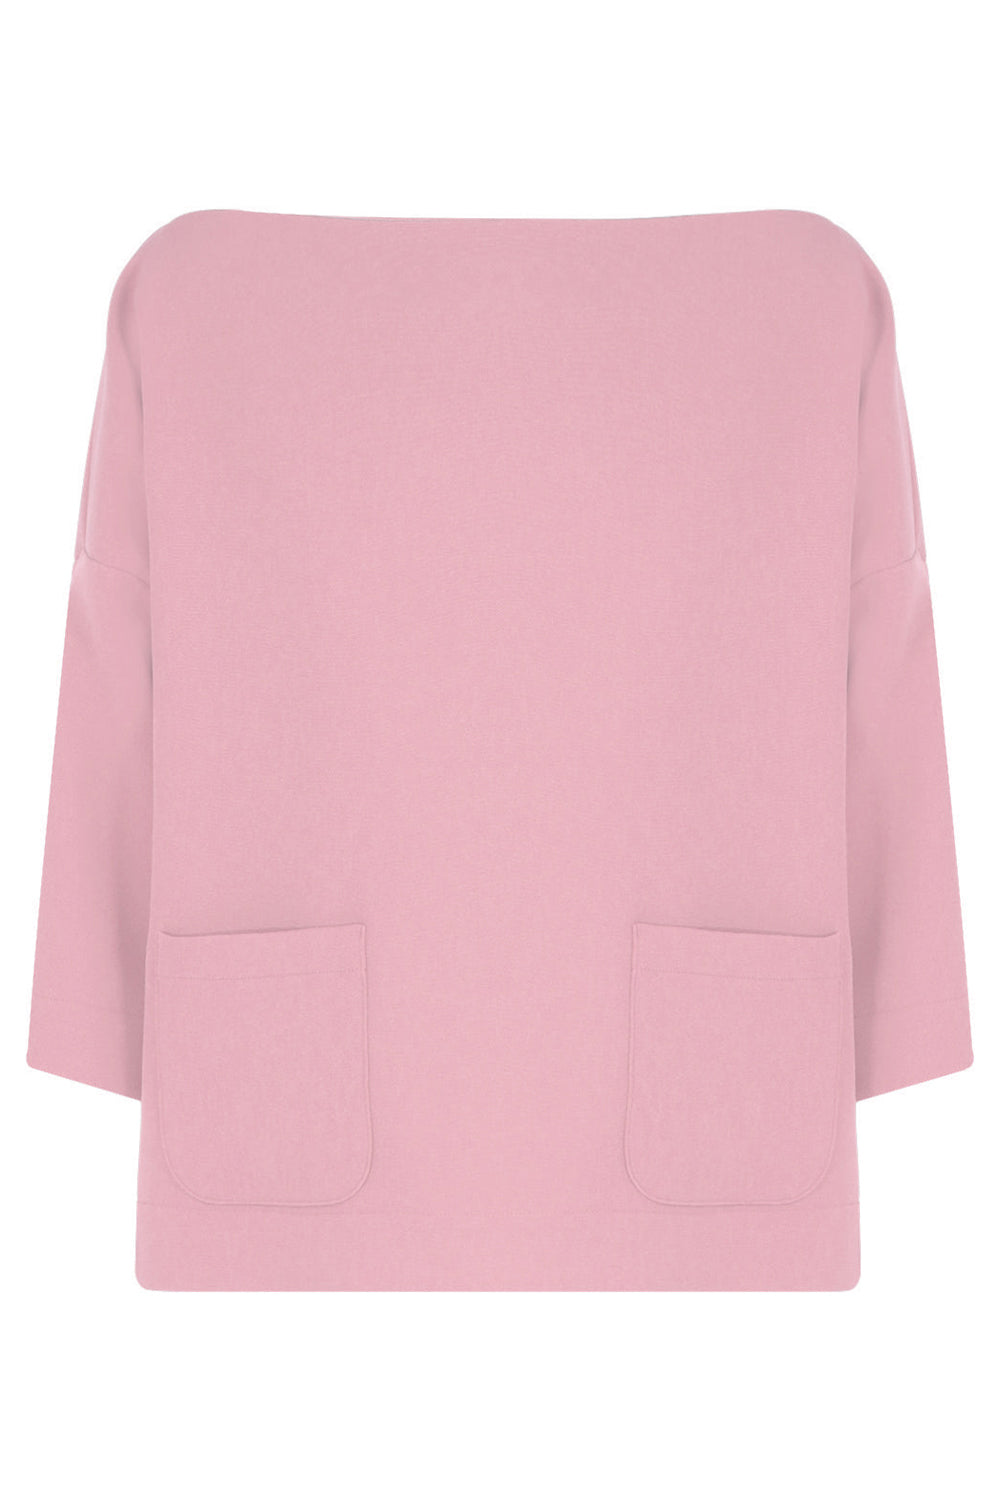 MAISON POI RTW TISSUE SWING TOP WITH POCKETS 3/4SL PINK